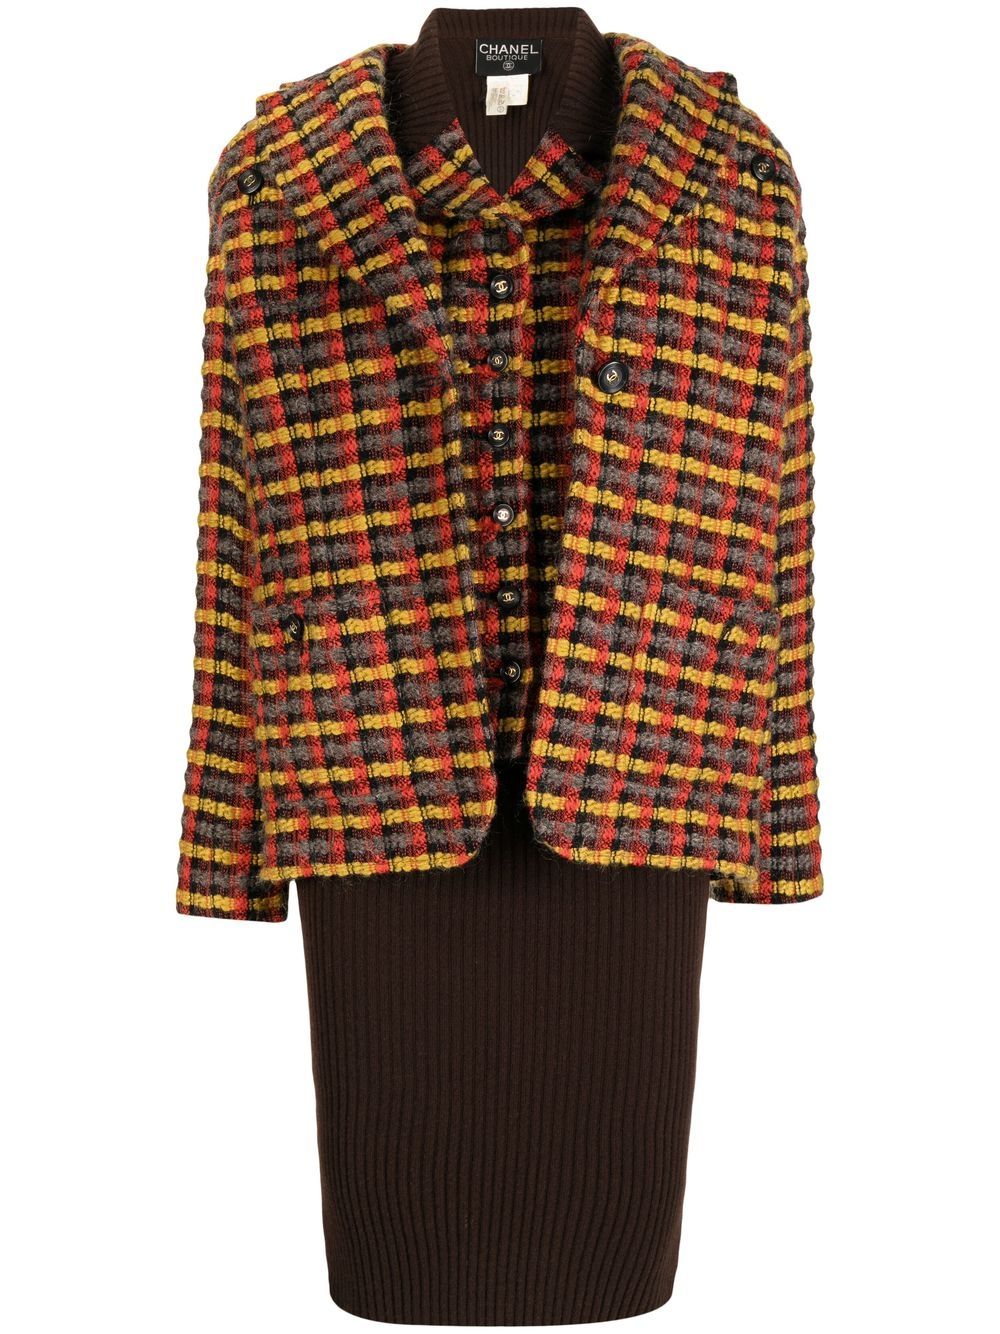 Chanel Pre-Owned 1995 tweed dress and jacket set - Brown